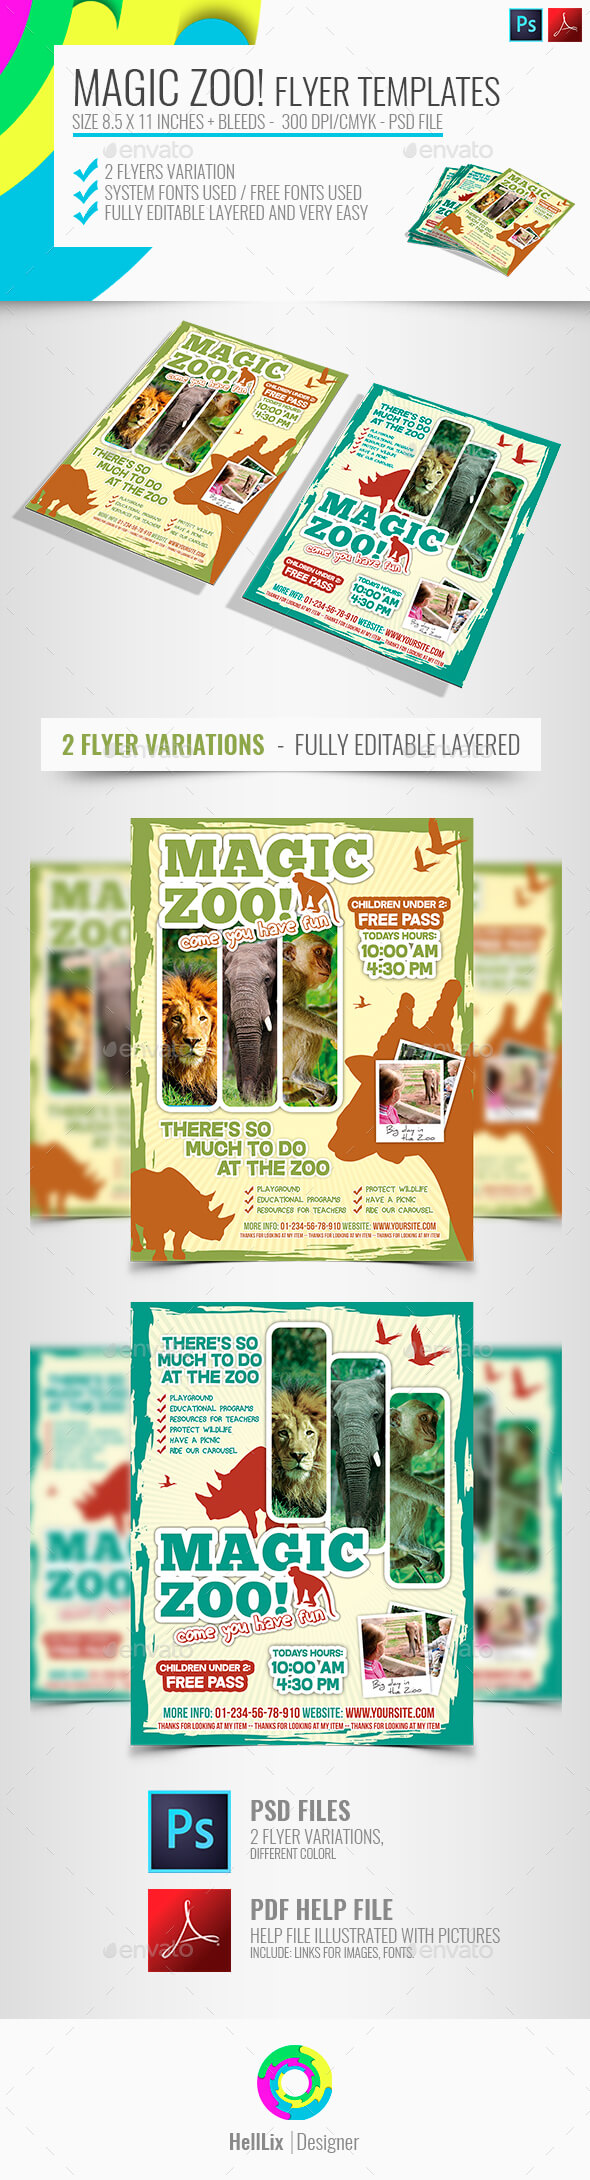 Zoo Stationery And Design Templates From Graphicriver Intended For Zoo Brochure Template